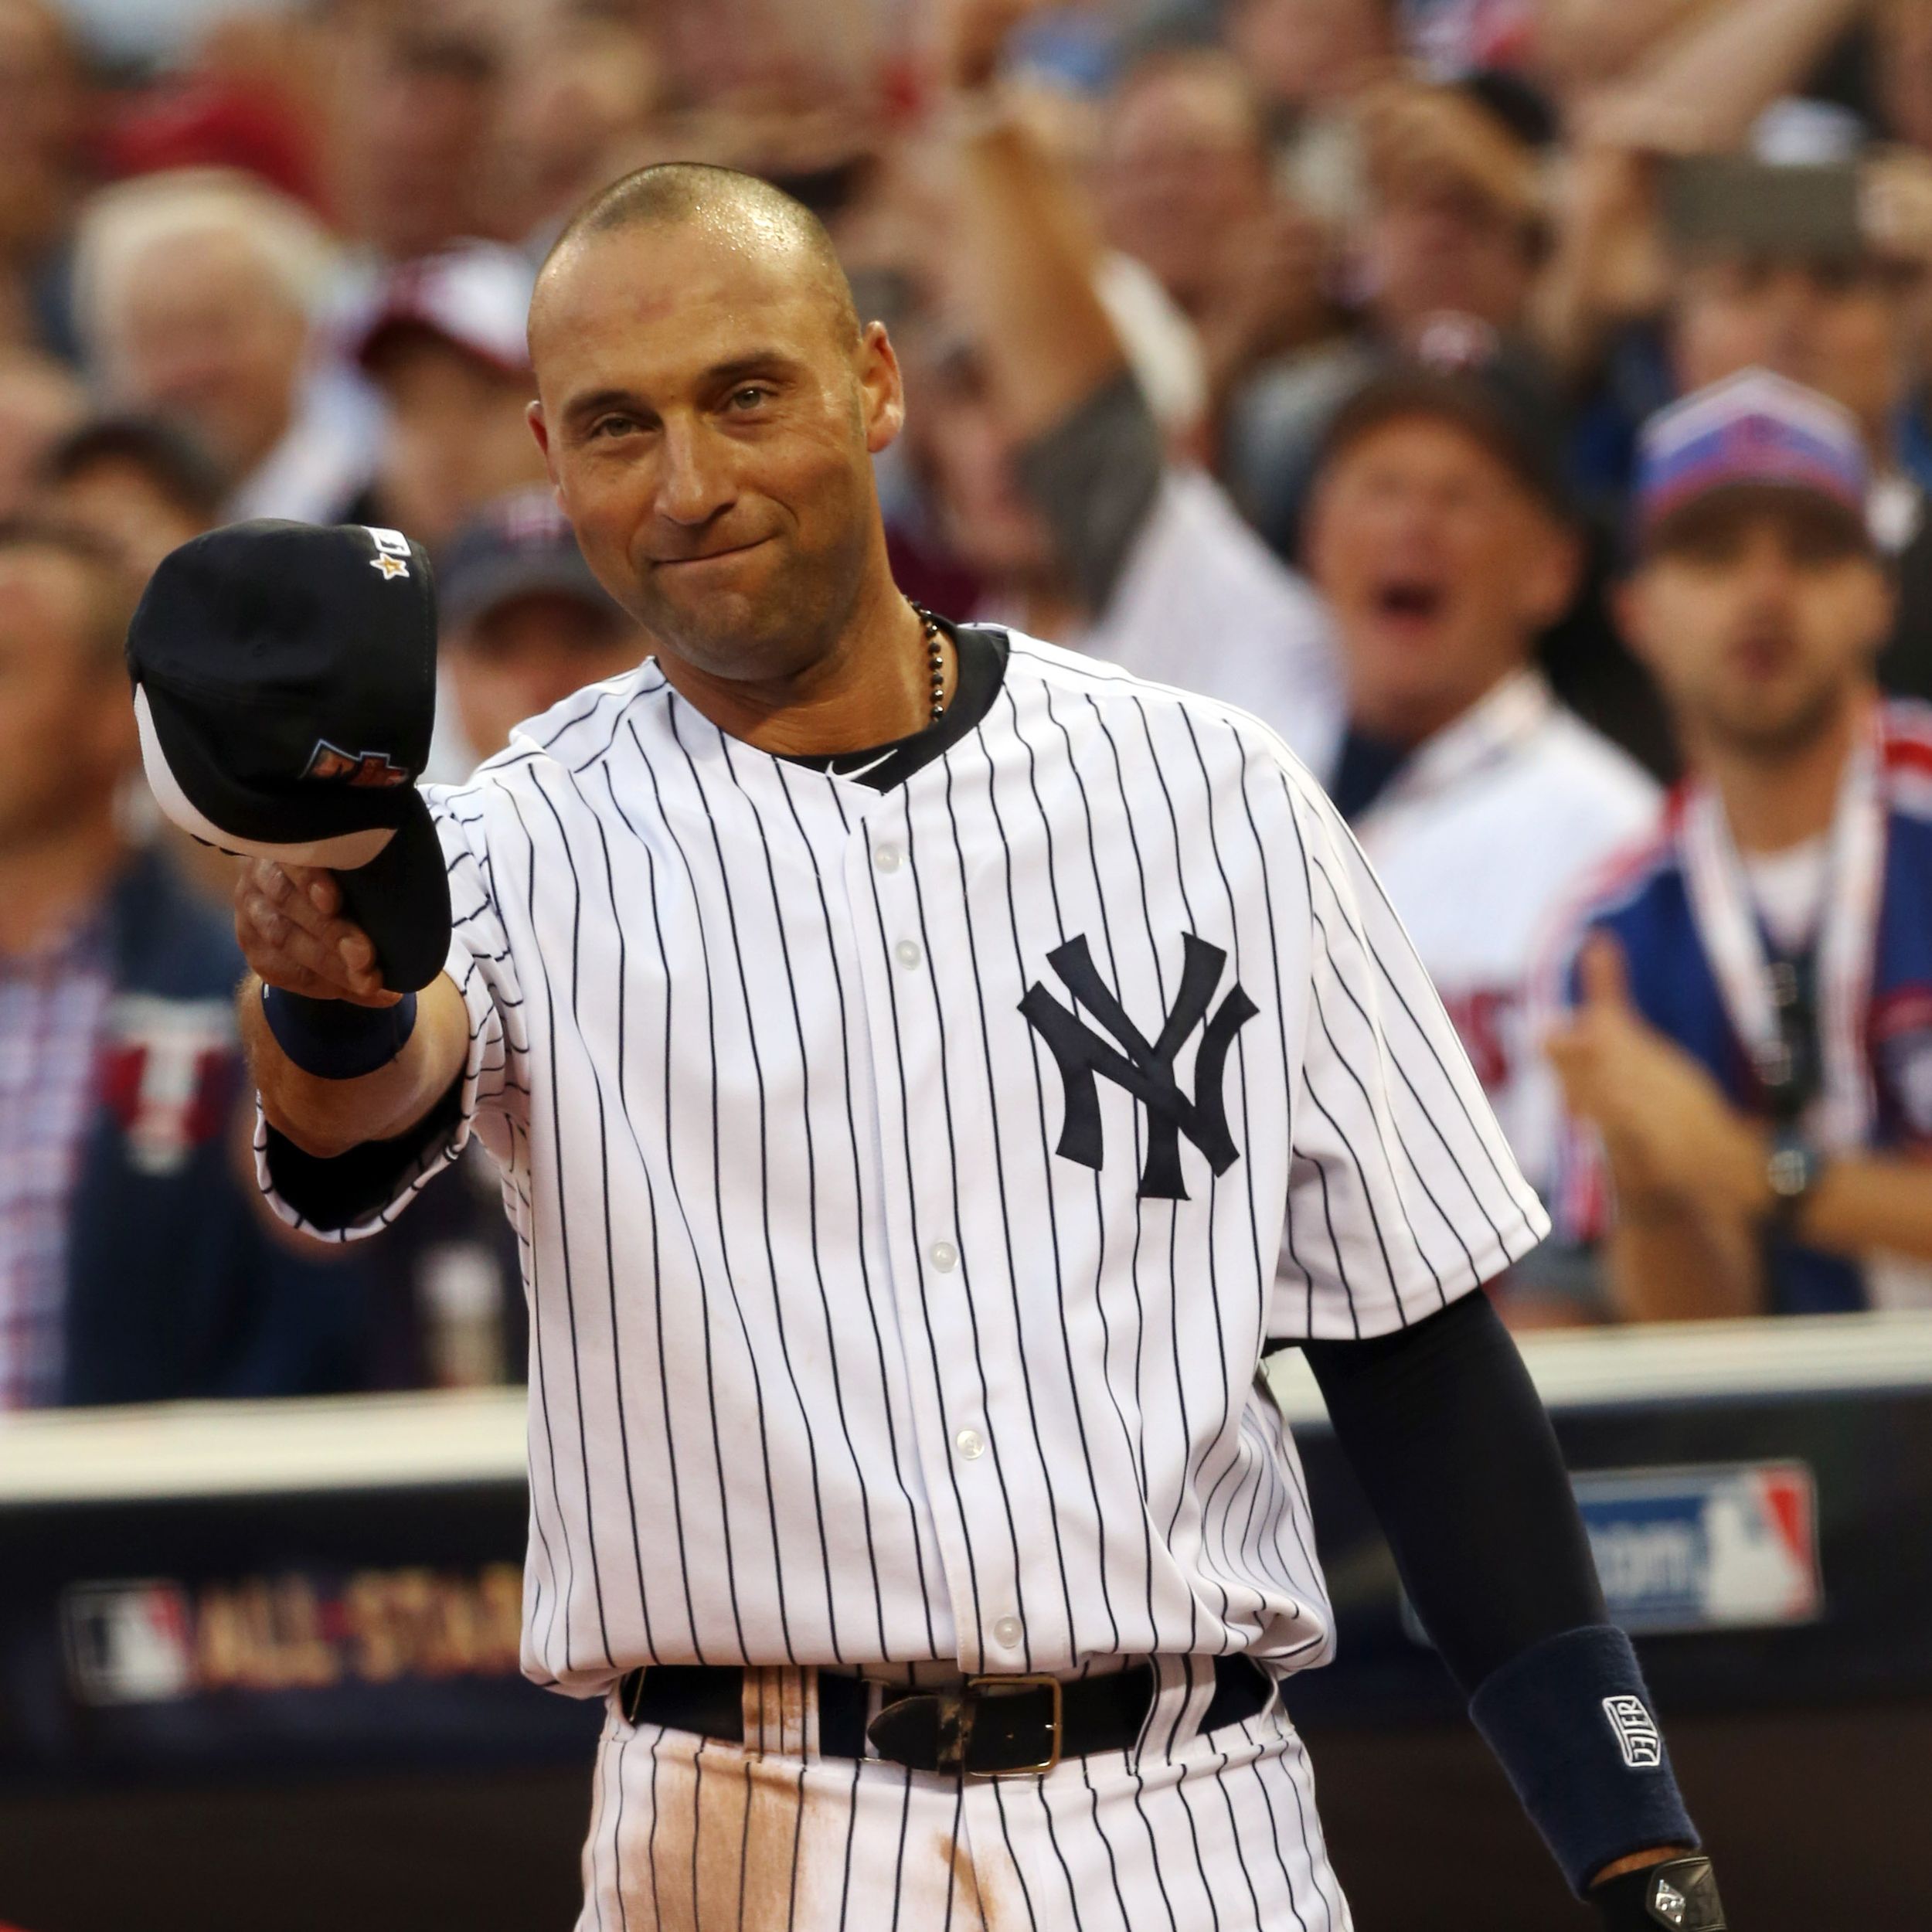 Derek Jeter gets two hits in final All-Star Game in 2014 